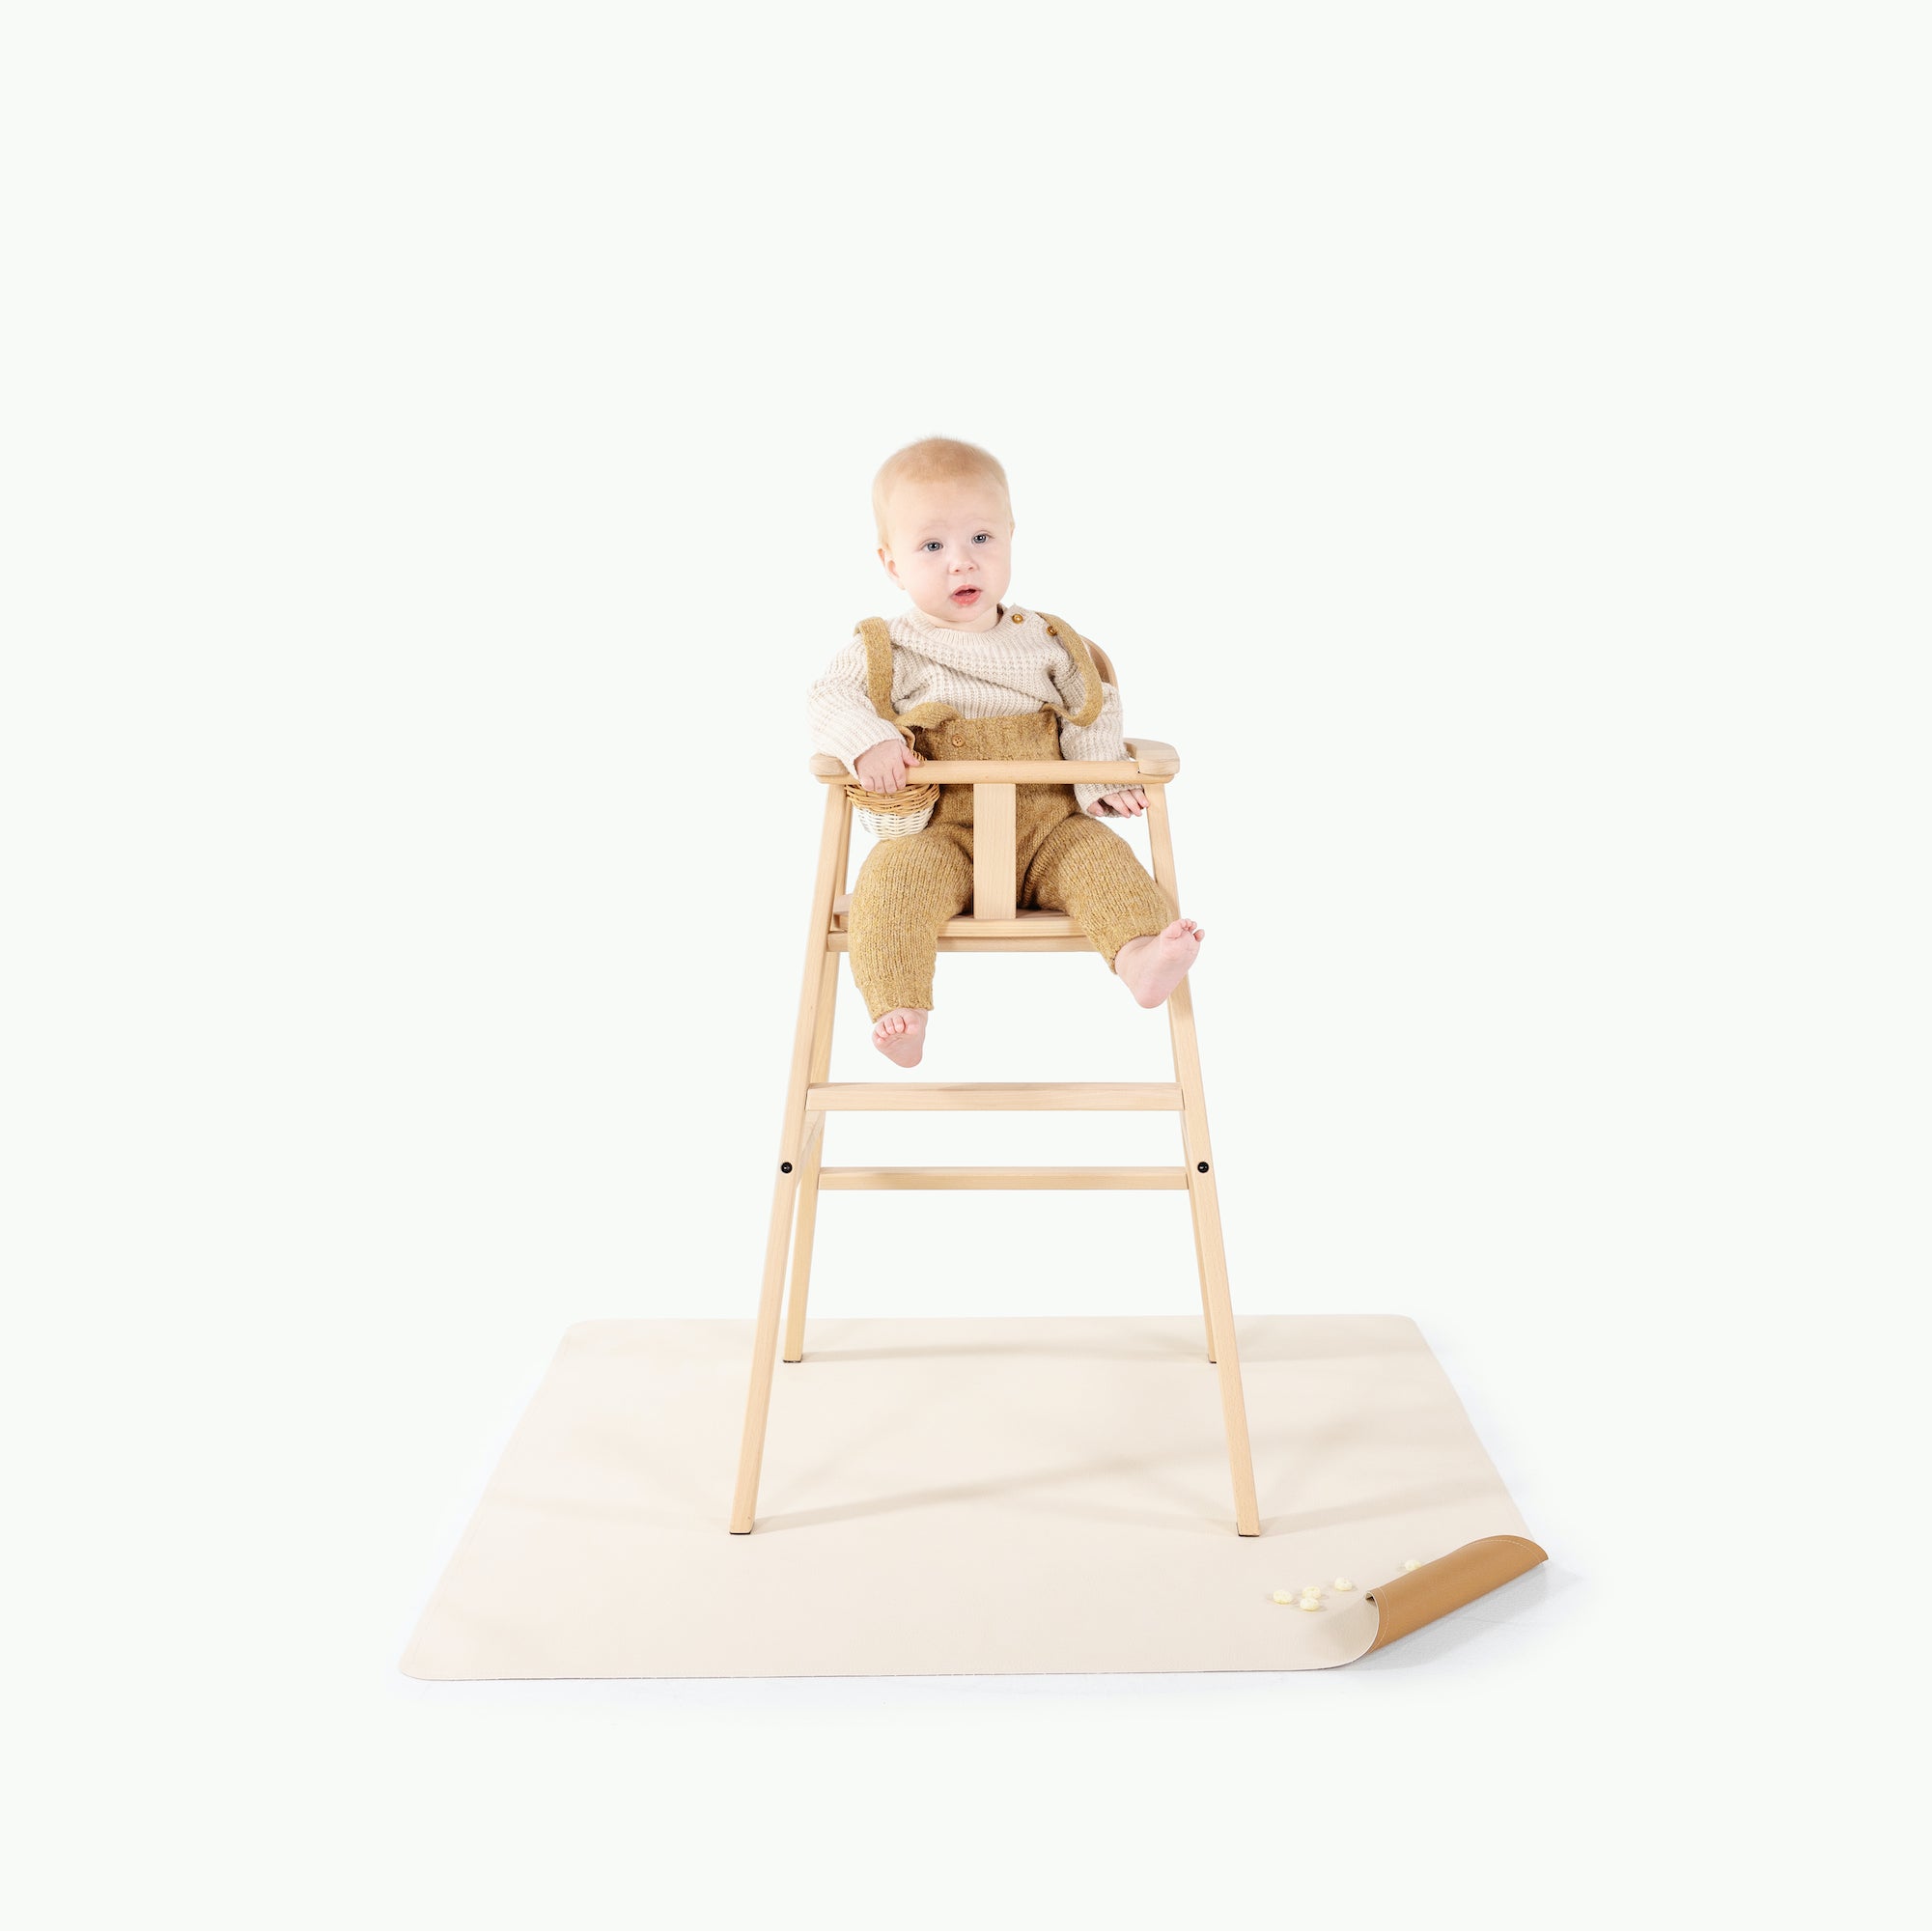 Camel • Ivory@baby in a high chair on top of a mini mat